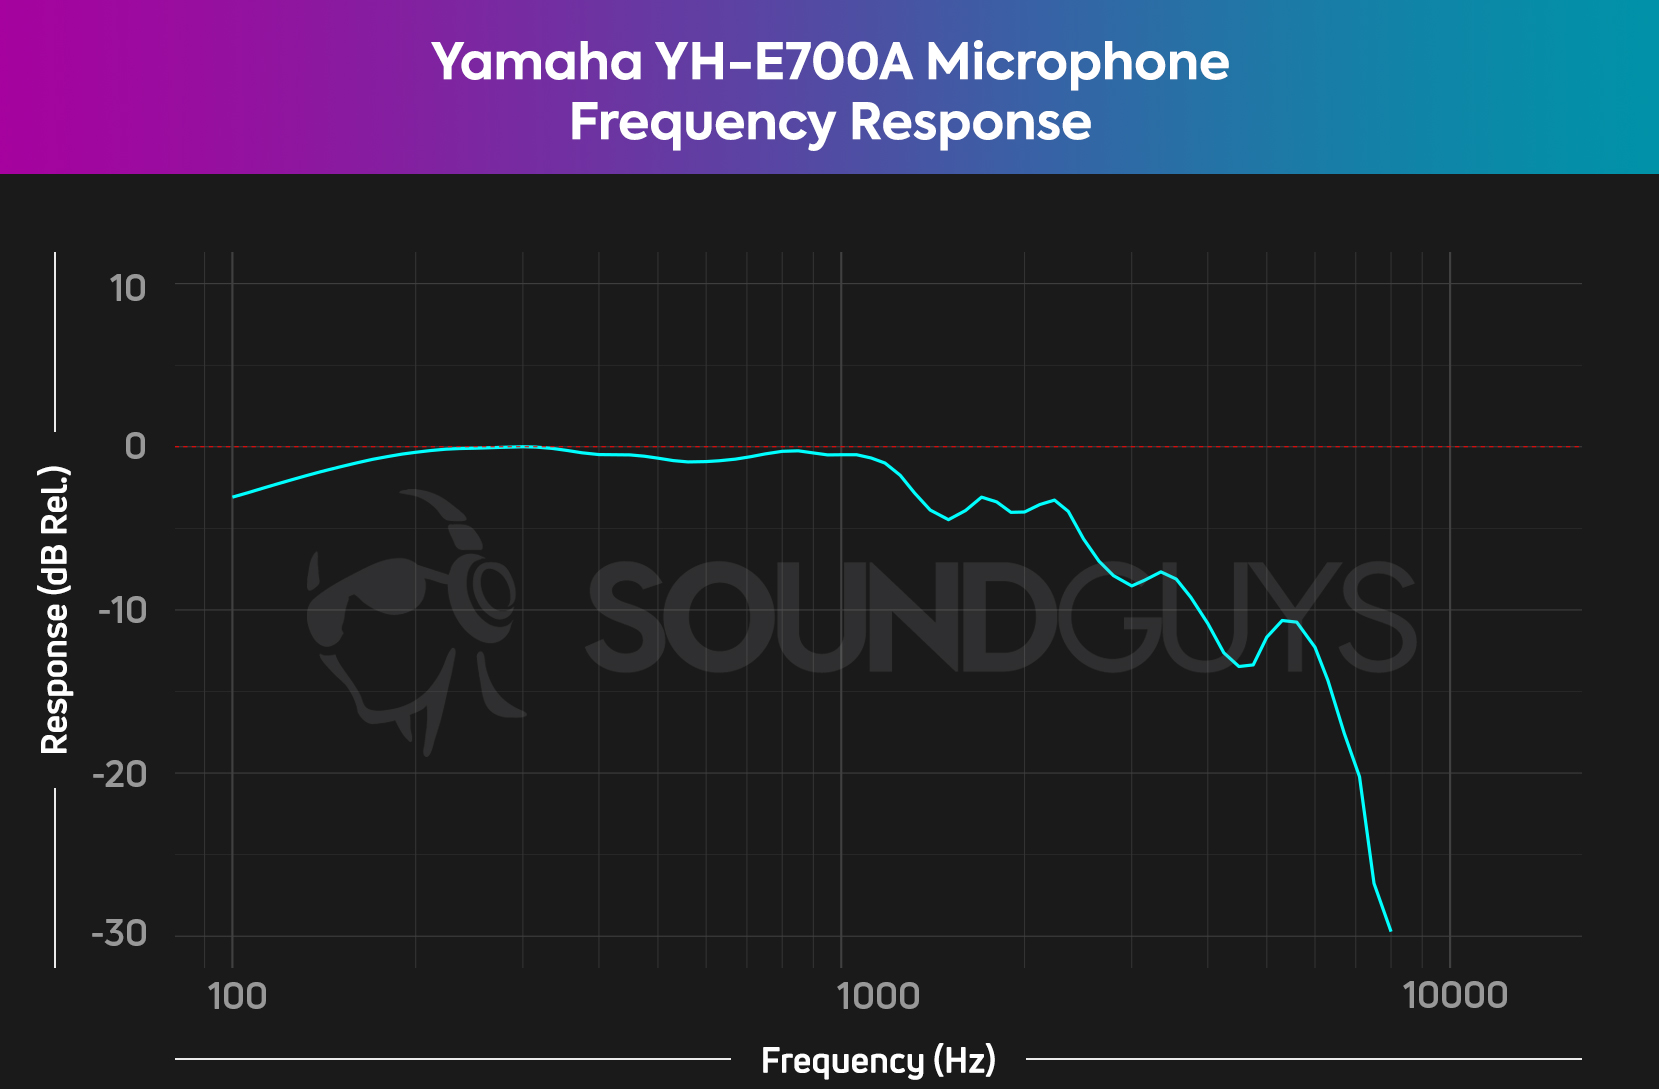 A chart depicts the frequency response of the Yamaha YH-E700A headset's microphone.